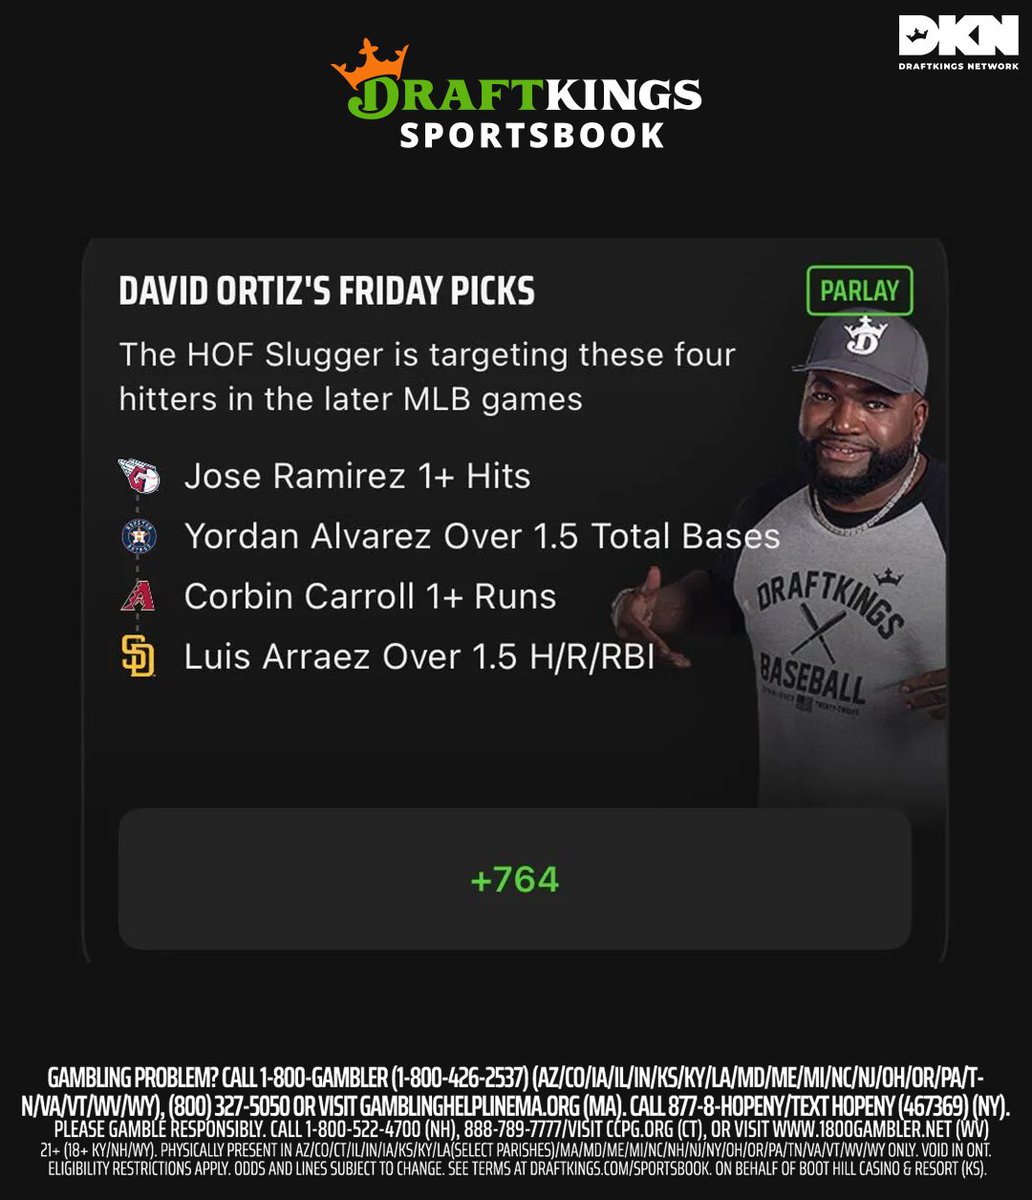 MLB PARLAY: “Big Papi” @DavidOrtiz likes these four hitters for today’s MLB betting card👇 ⚾Jose Ramirez 1+ Hits ⚾Yordan Alvarez Over 1.5 Total Bases ⚾Corbin Carroll 1+ Runs ⚾Luis Arraez Over 1.5 Hits + Runs + RBIs Odds via @DKSportsbook Are you rolling with this bet?🤔